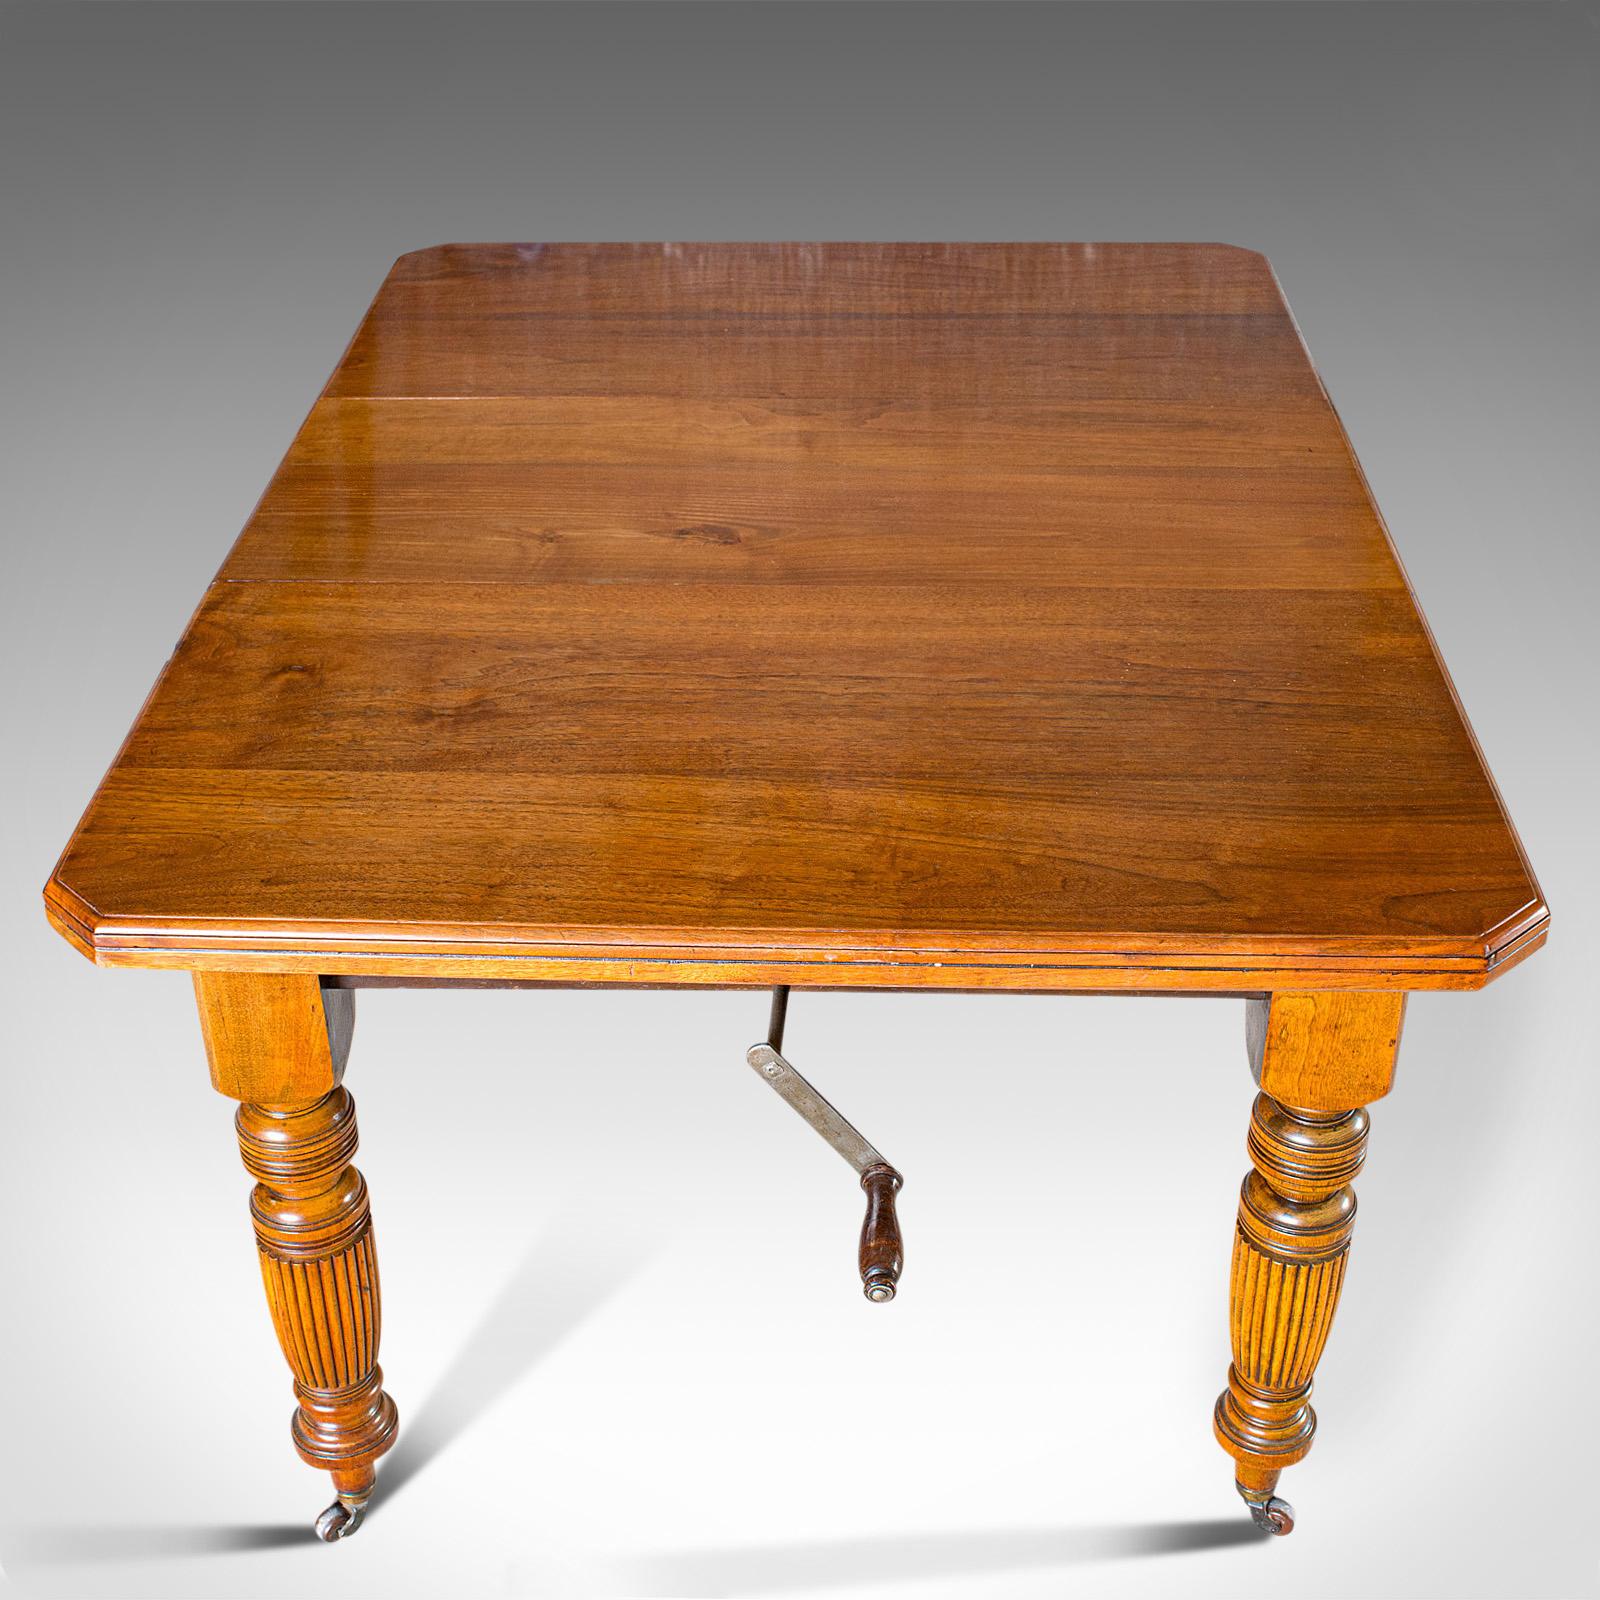 Antique Extending Dining Table, English, Walnut, Seats 4-6, Victorian, 1890 1